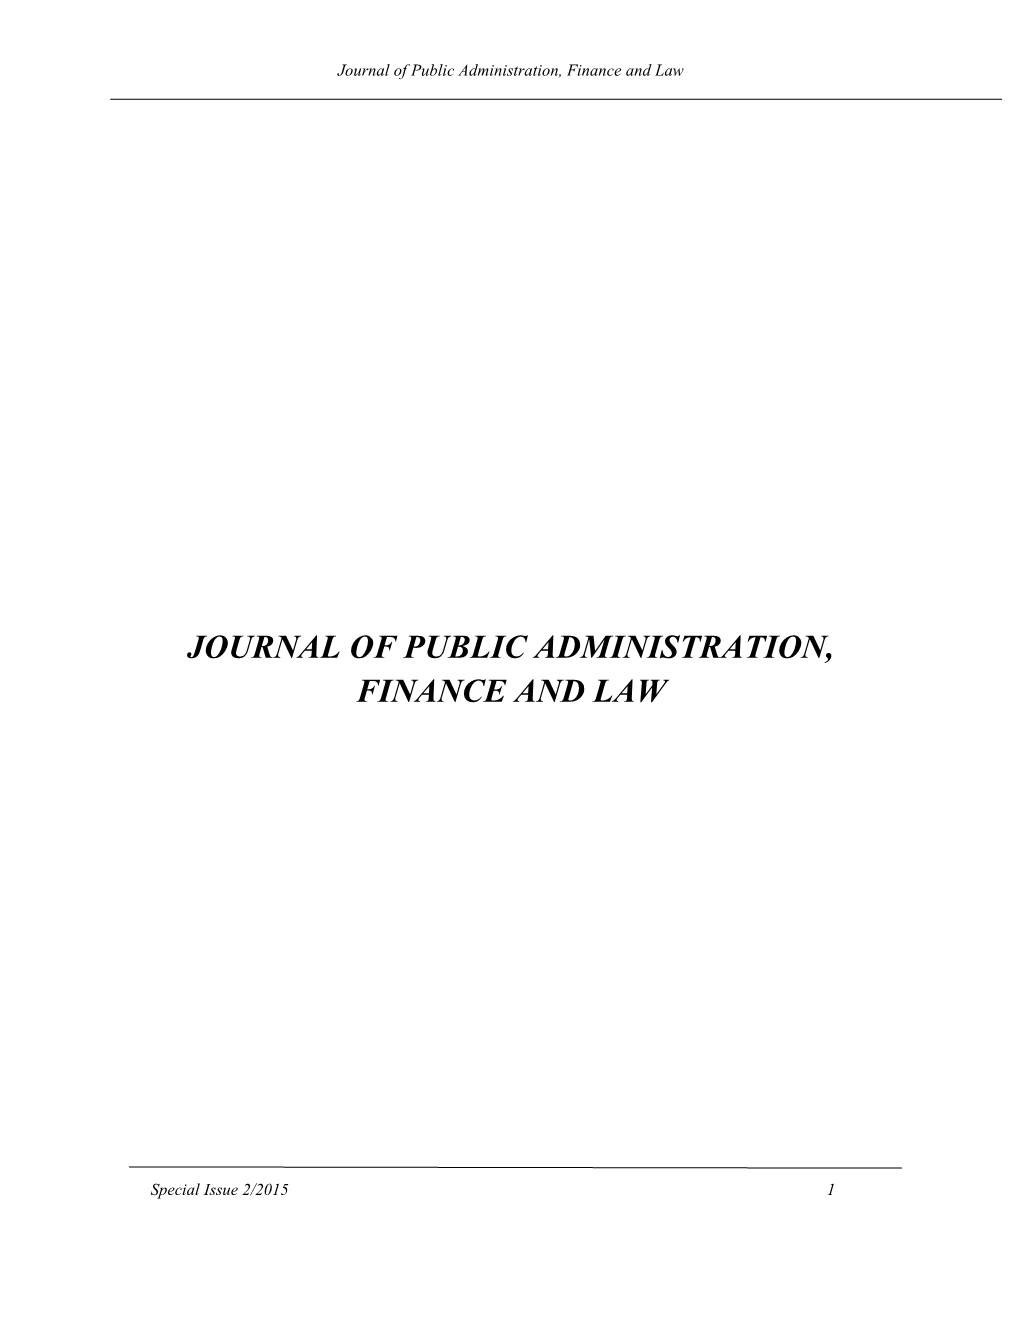 Journal of Public Administration, Finance and Law (JOPAFL) Issue 5/2014, Pp